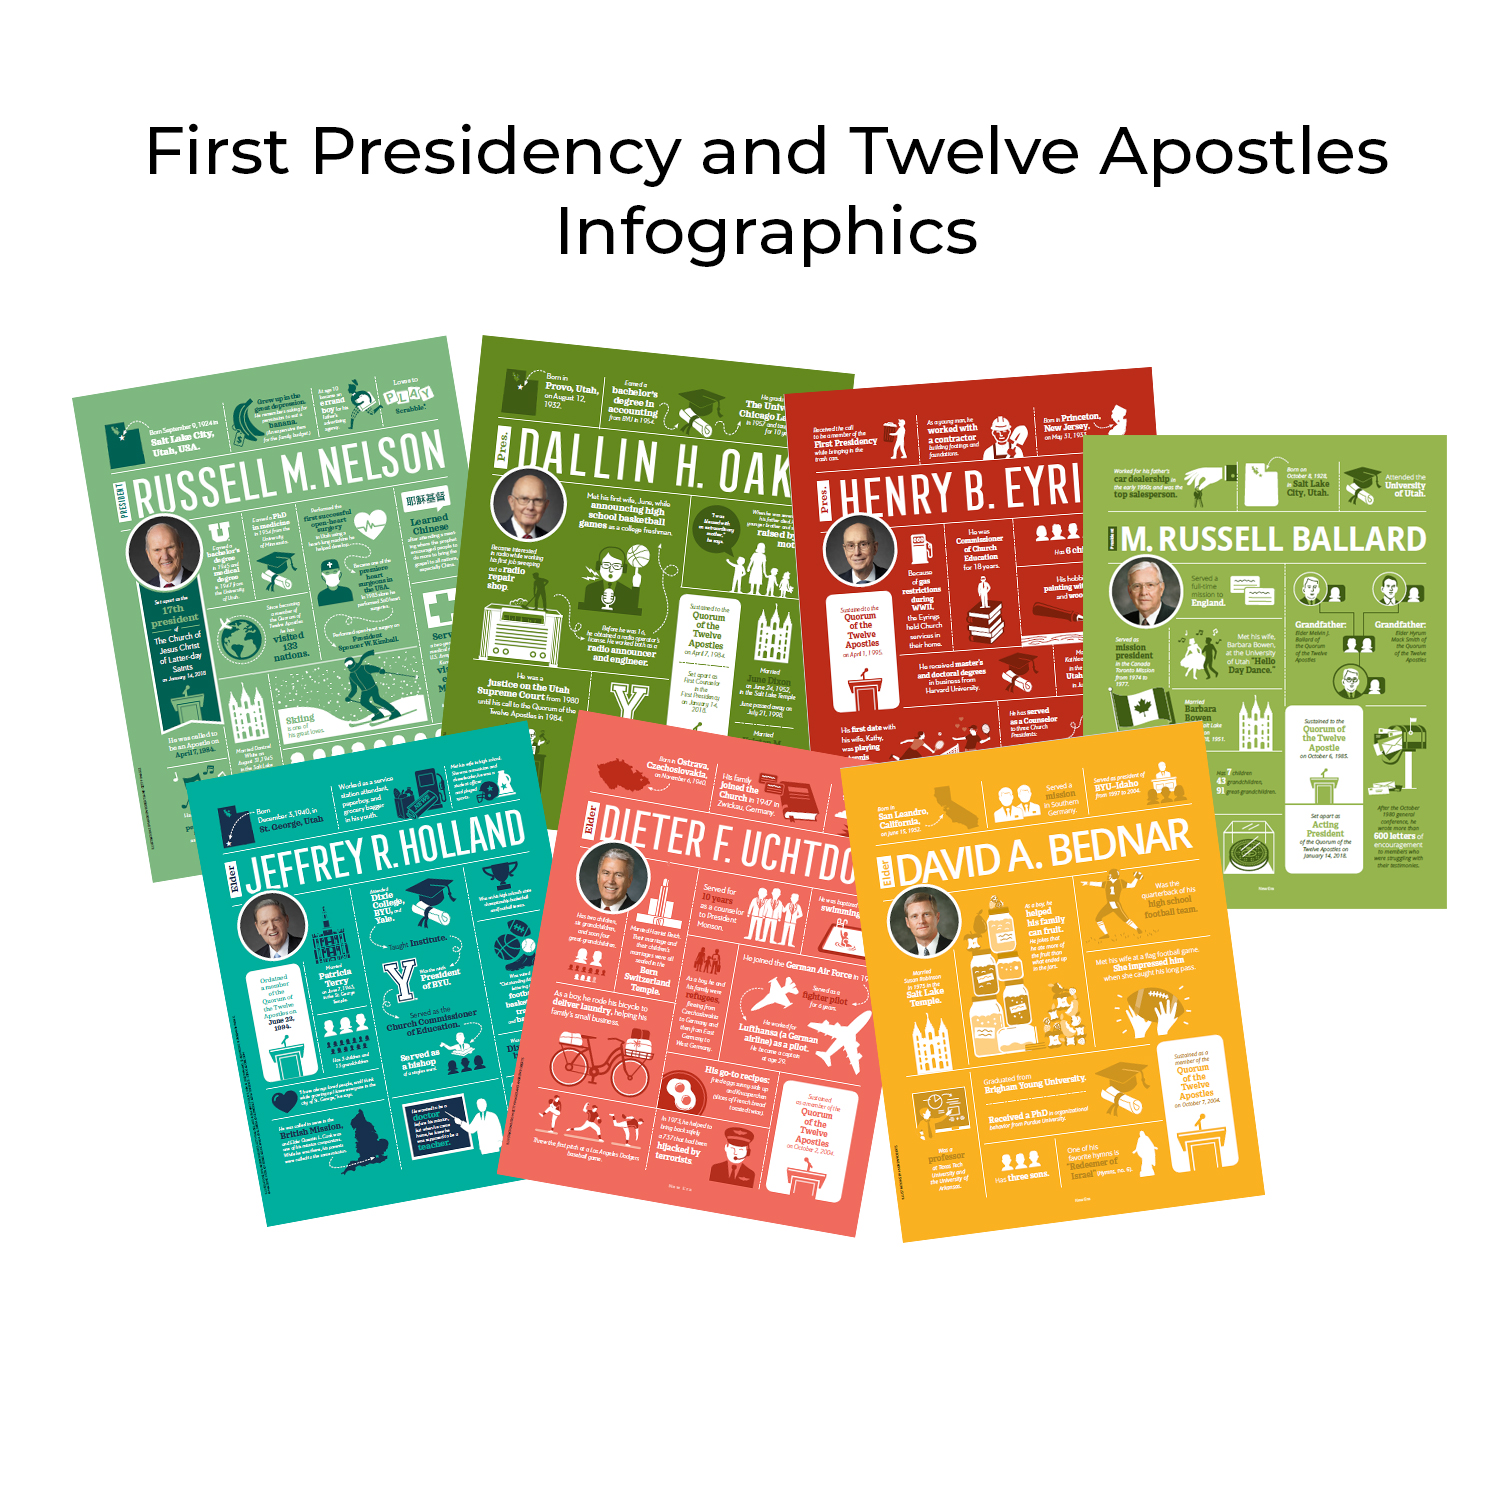 Infographics of the First Presidency and Twelve Apostles printed in the New Era 2018-2019.